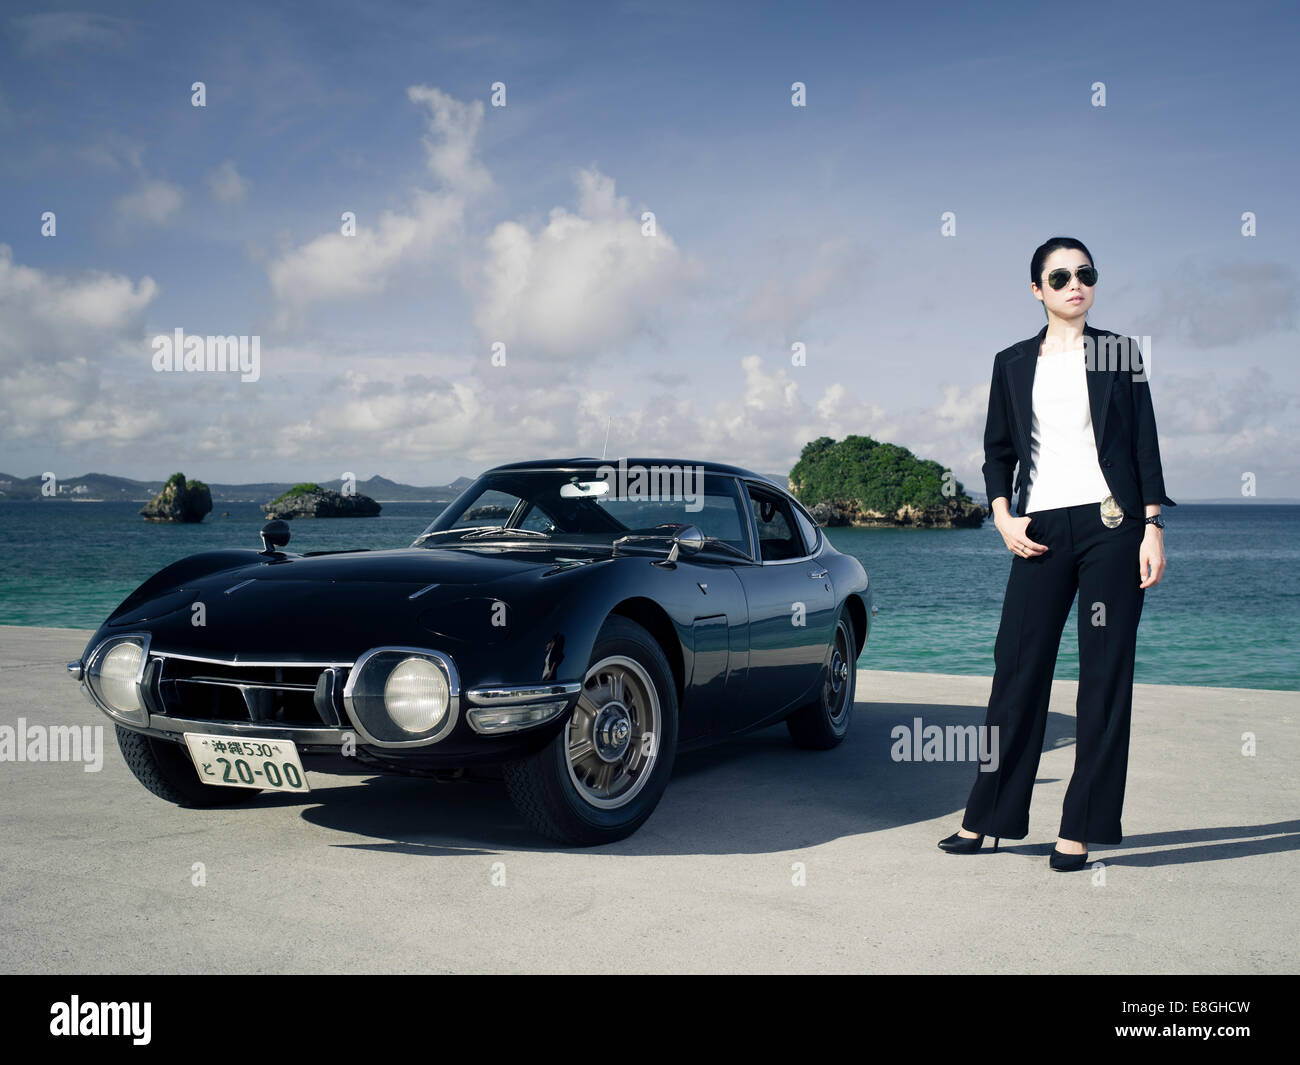 'Detective' with LHD Toyota 2000GT Japanese sports car in Okinawa, Japan. Stock Photo